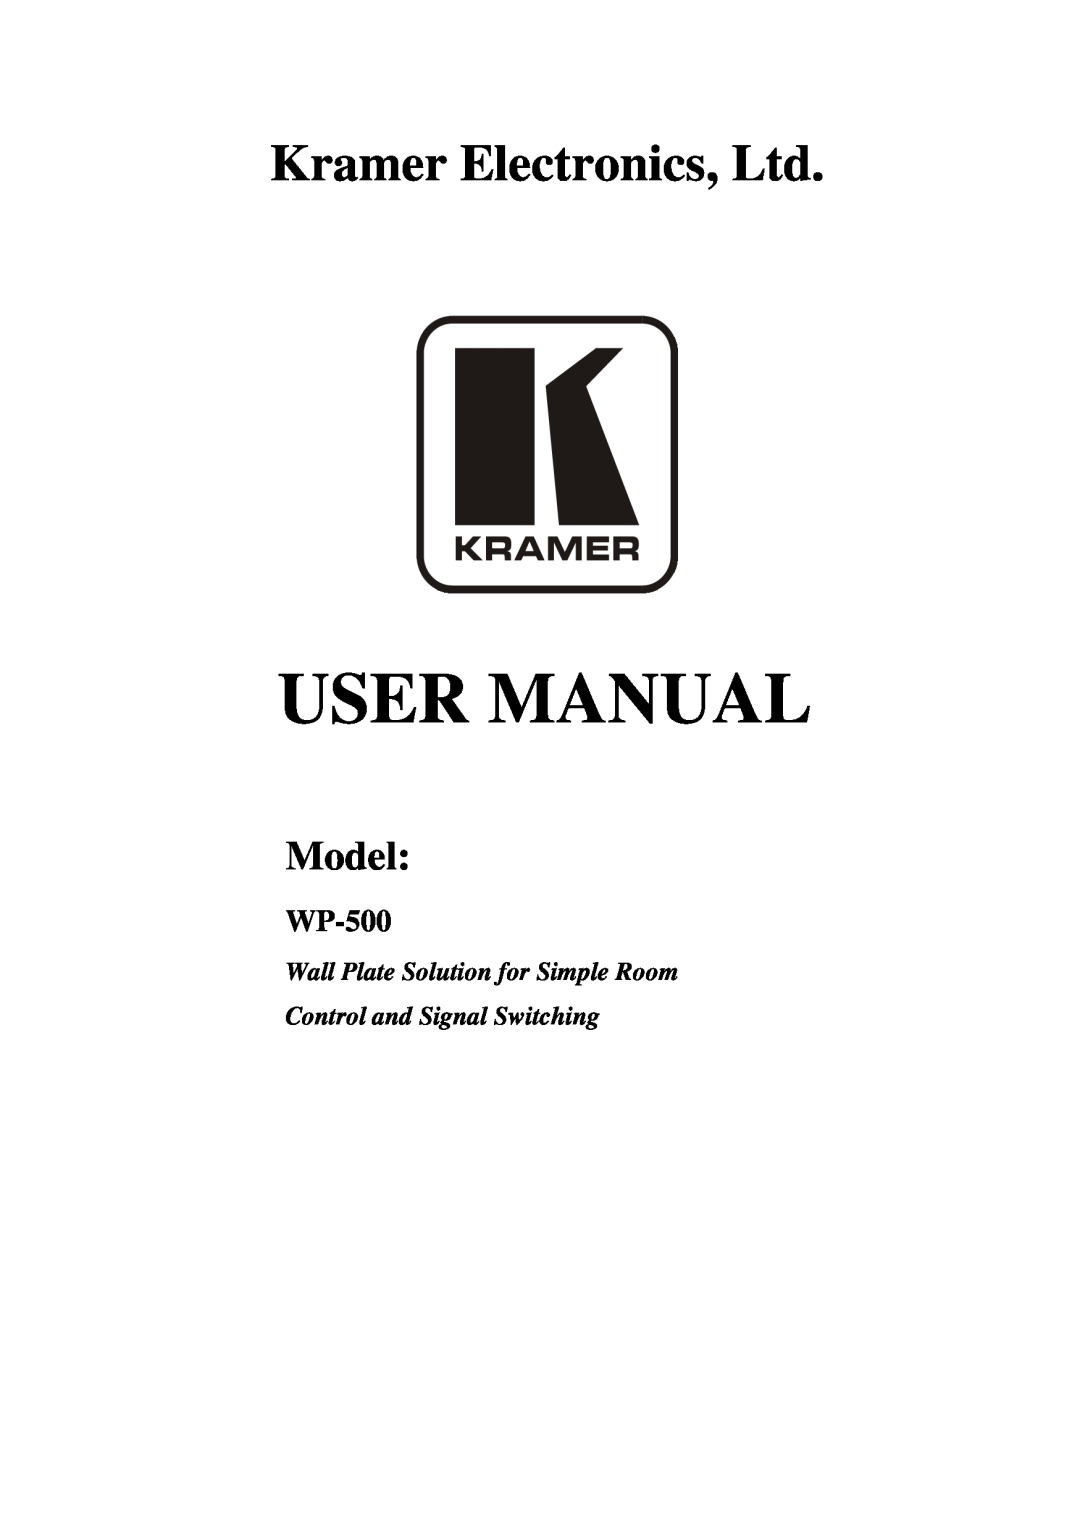 Kramer Electronics WP-500 user manual Model, Wall Plate Solution for Simple Room, Control and Signal Switching 